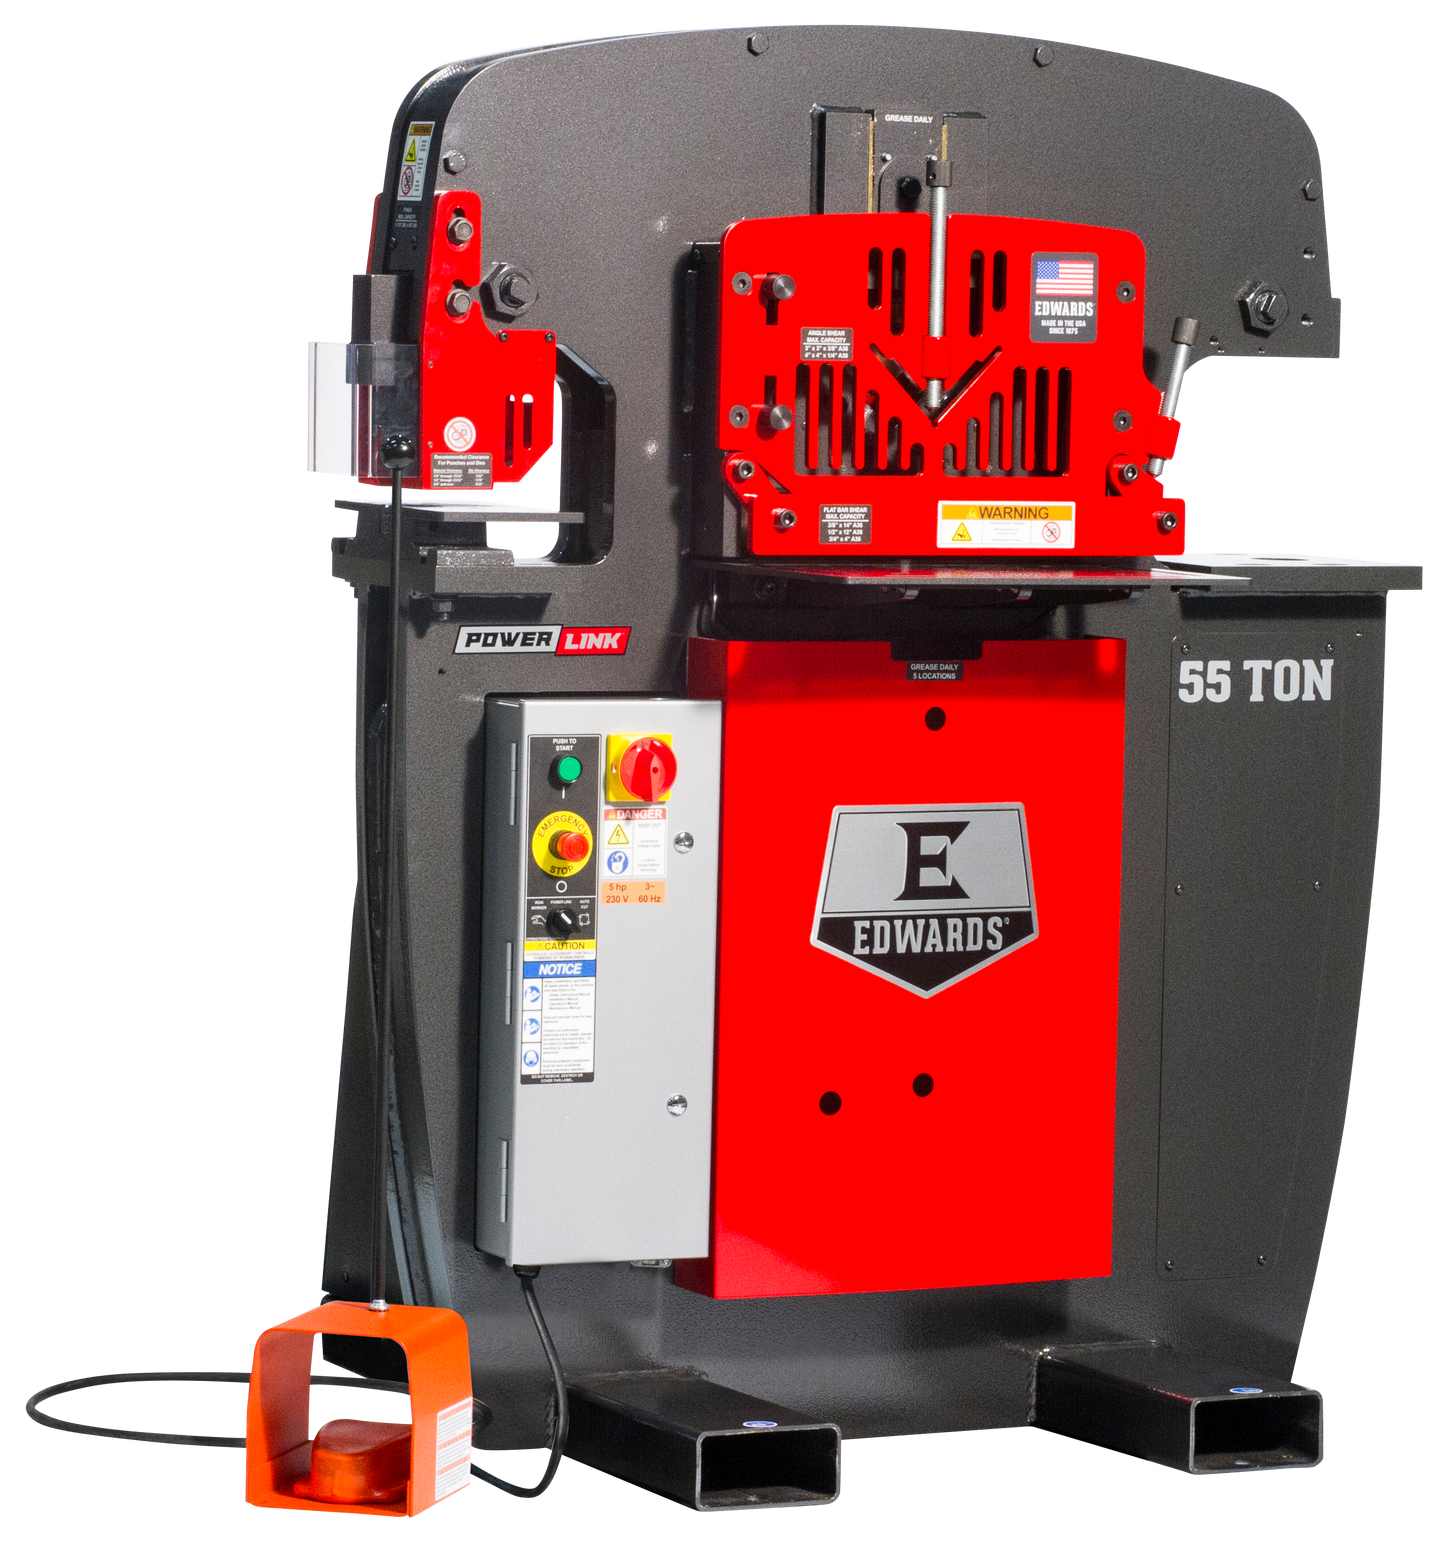 55 Ton Ironworker 3 Phase, 208 Volt with PowerLink